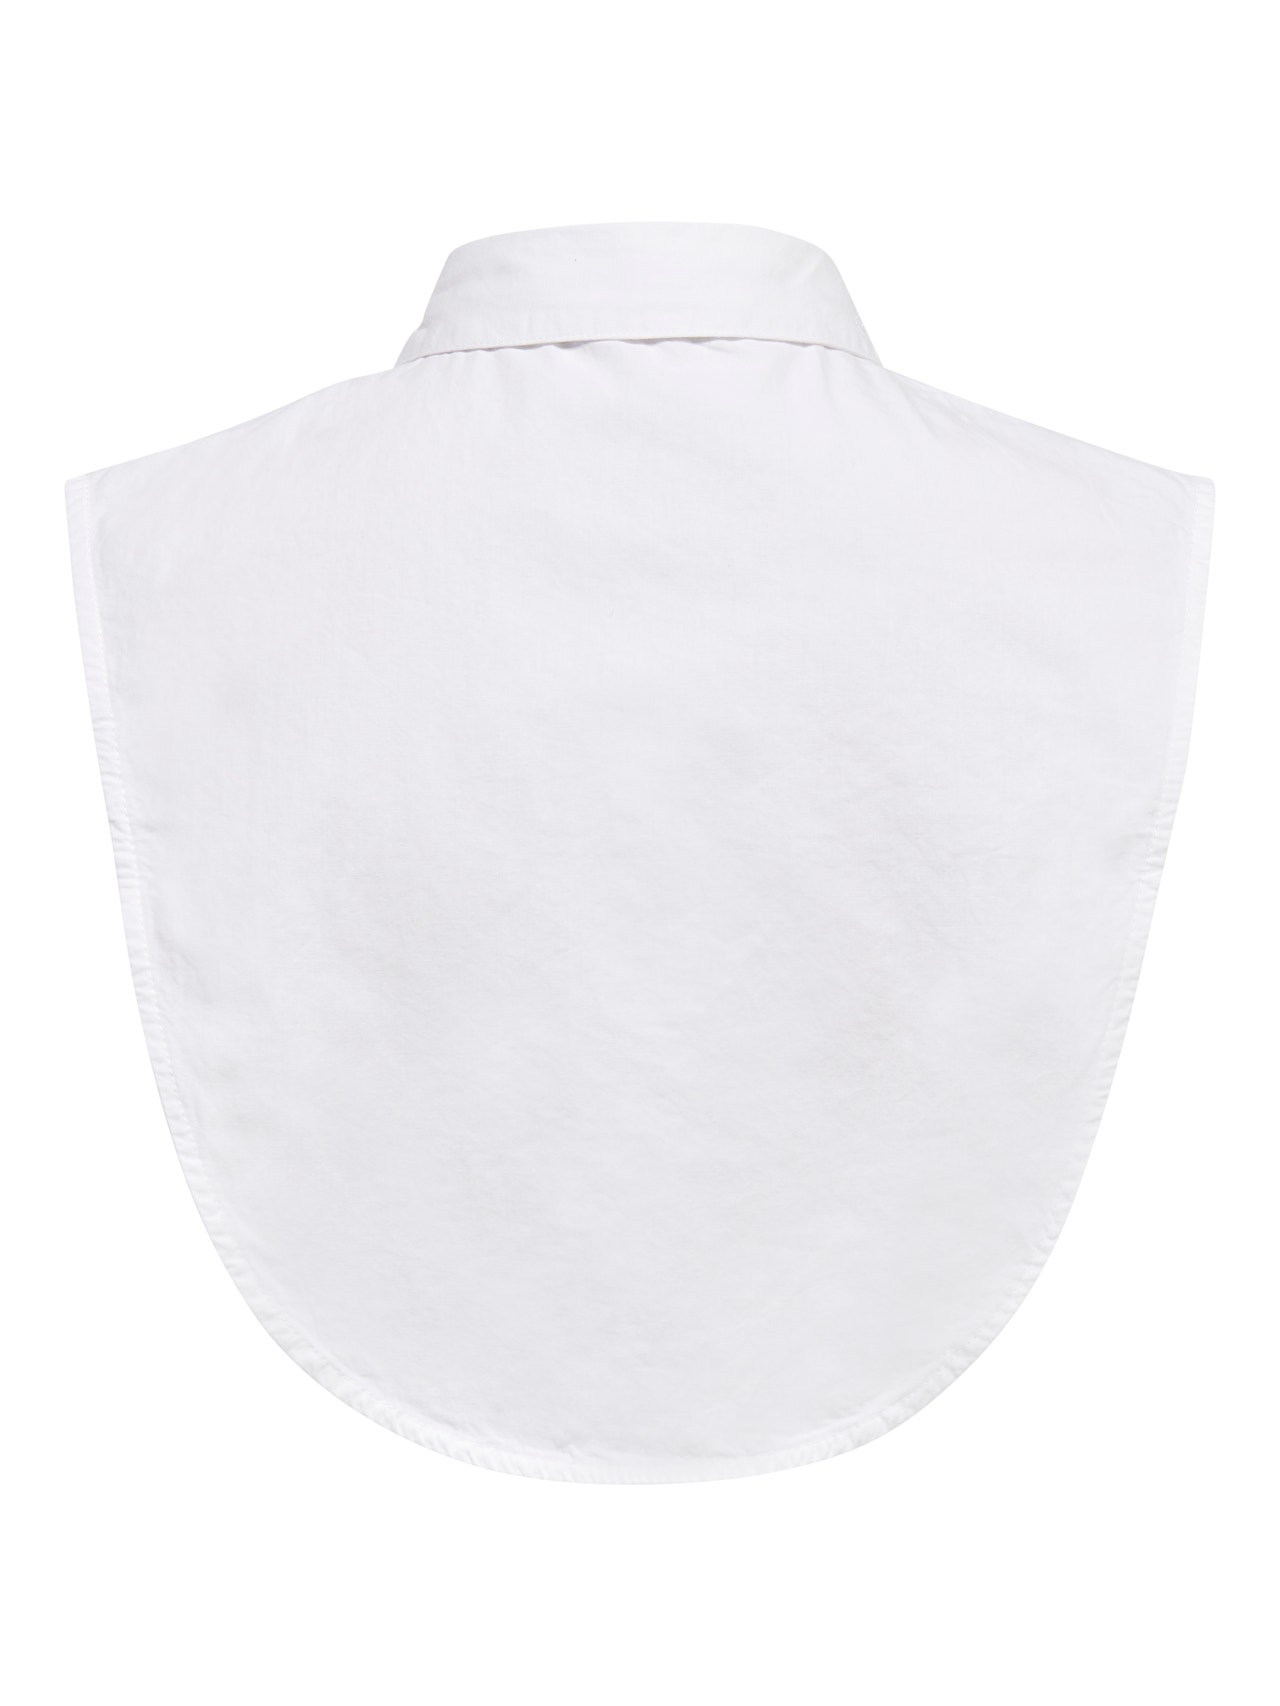 ONLY Other Accessories -Bright White - 15146071